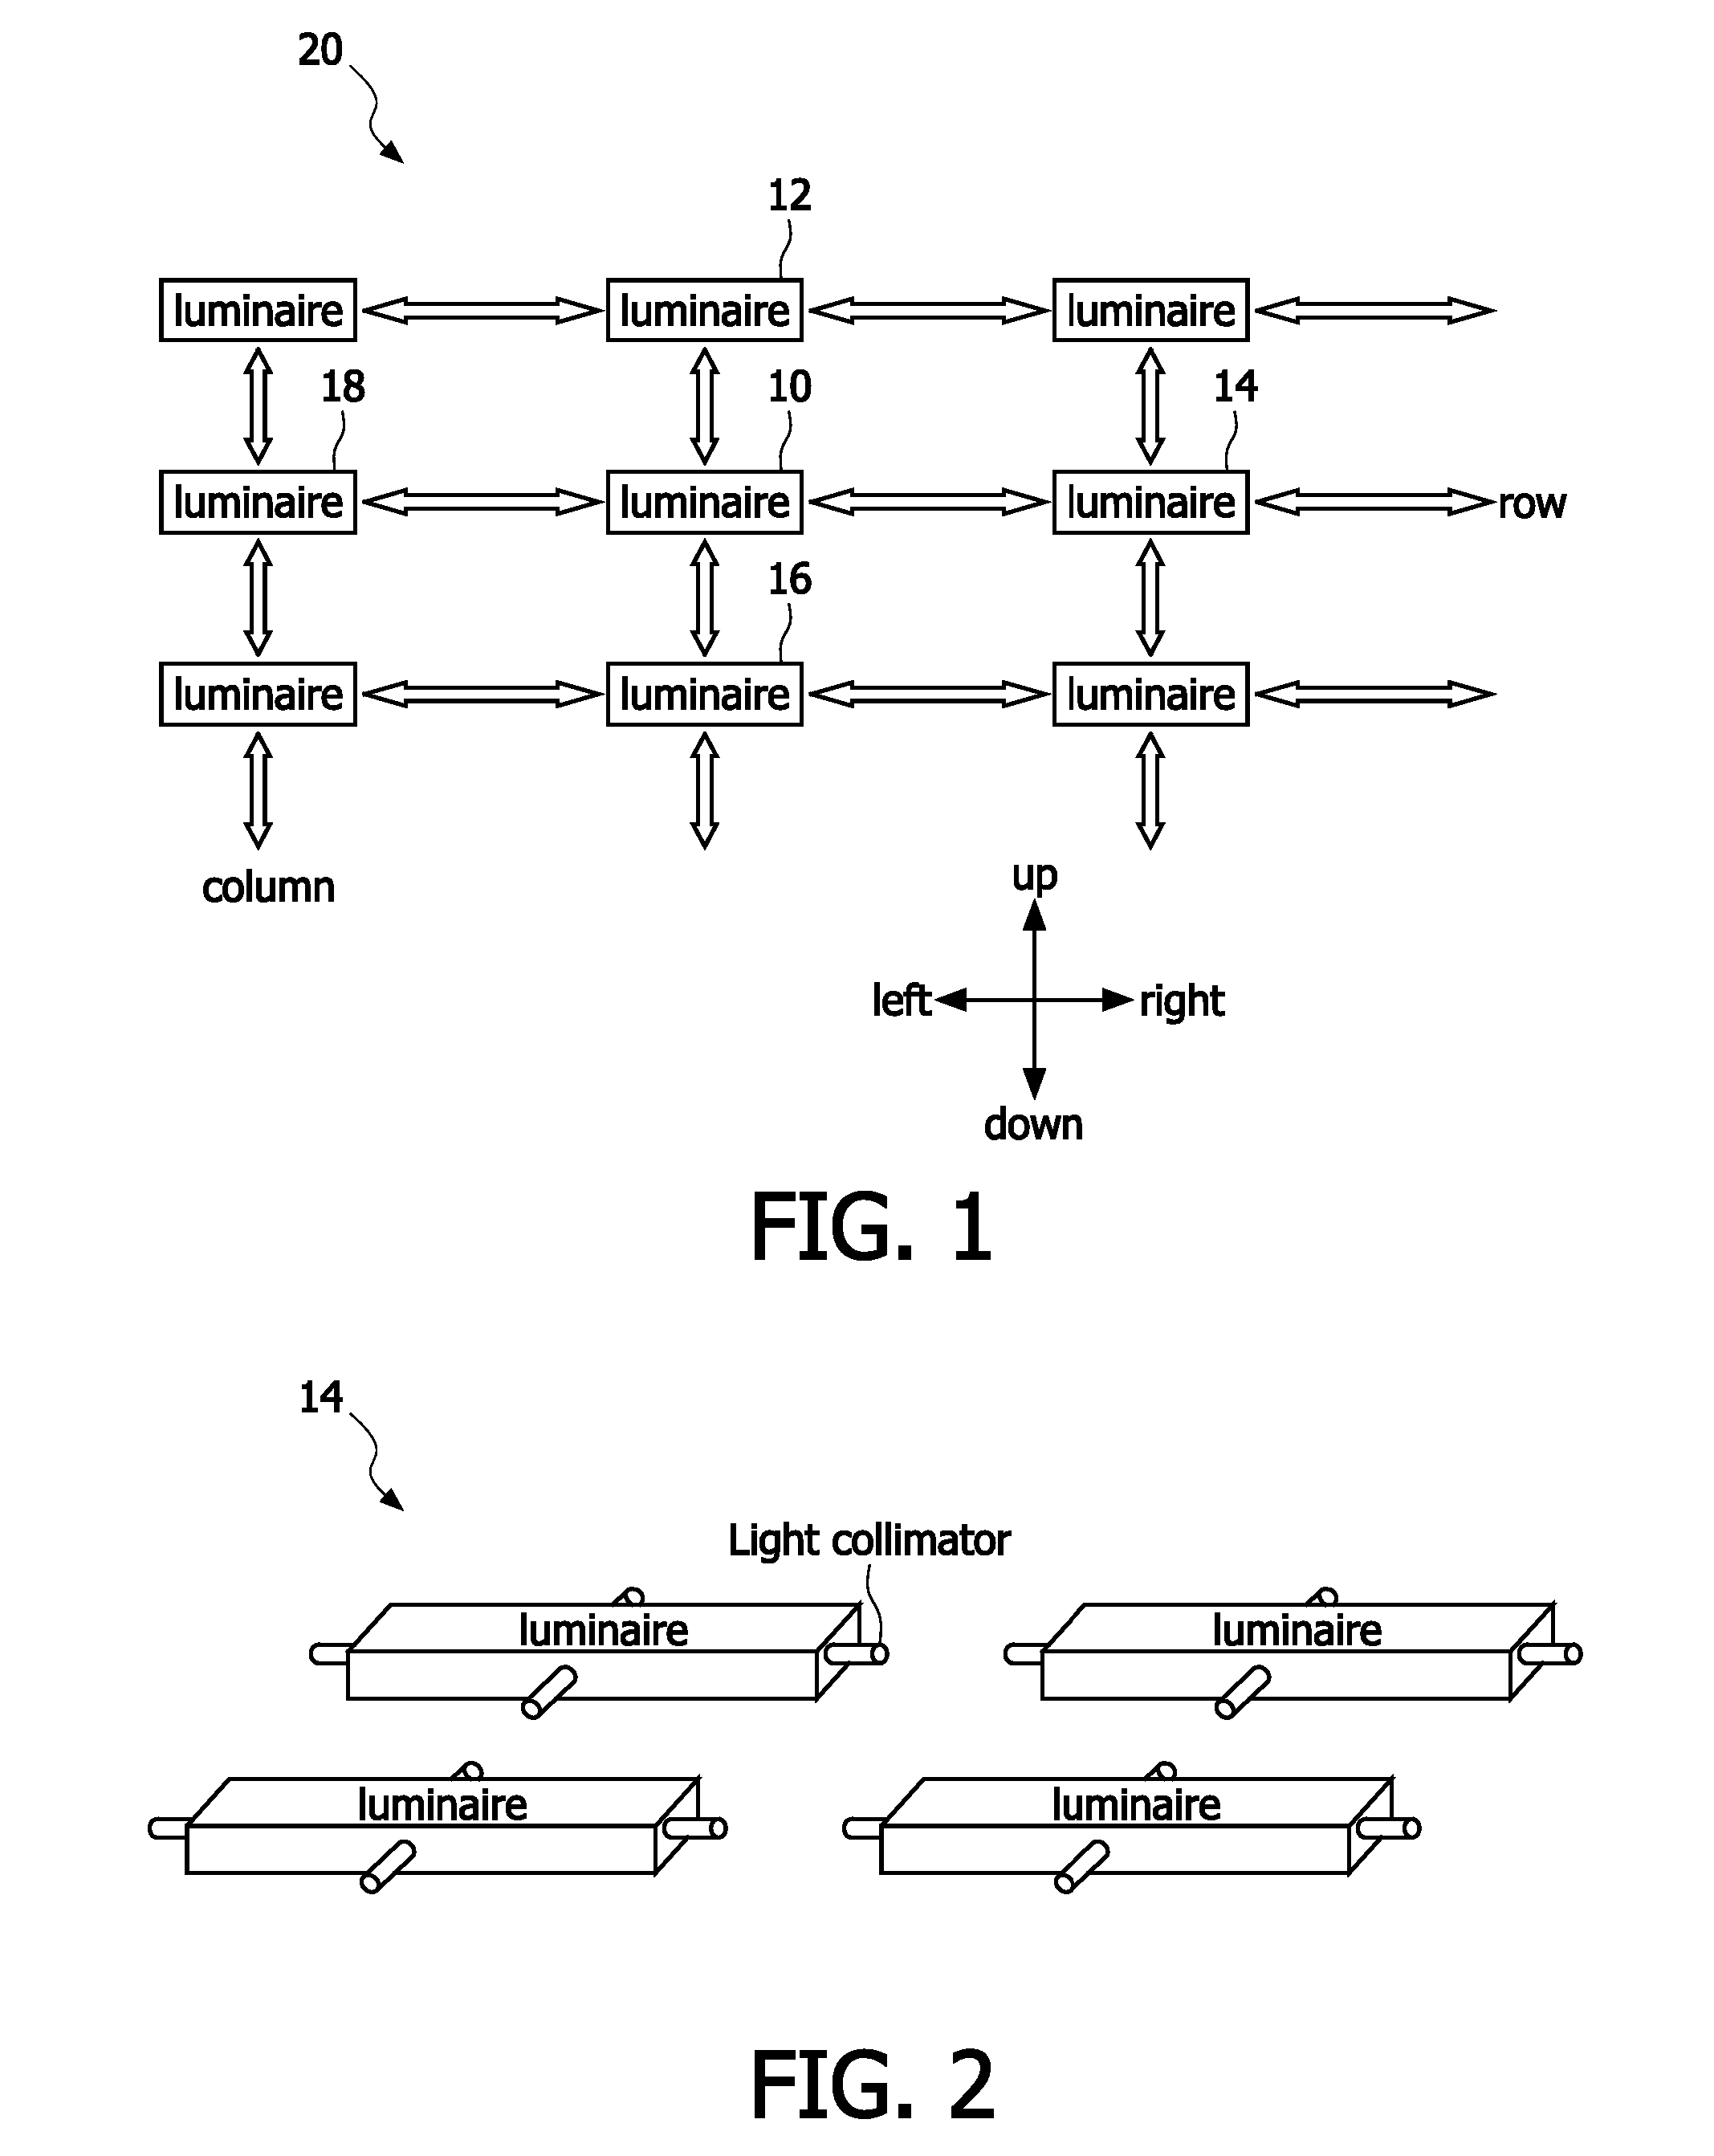 Automatically commissioning of devices of a networked control system